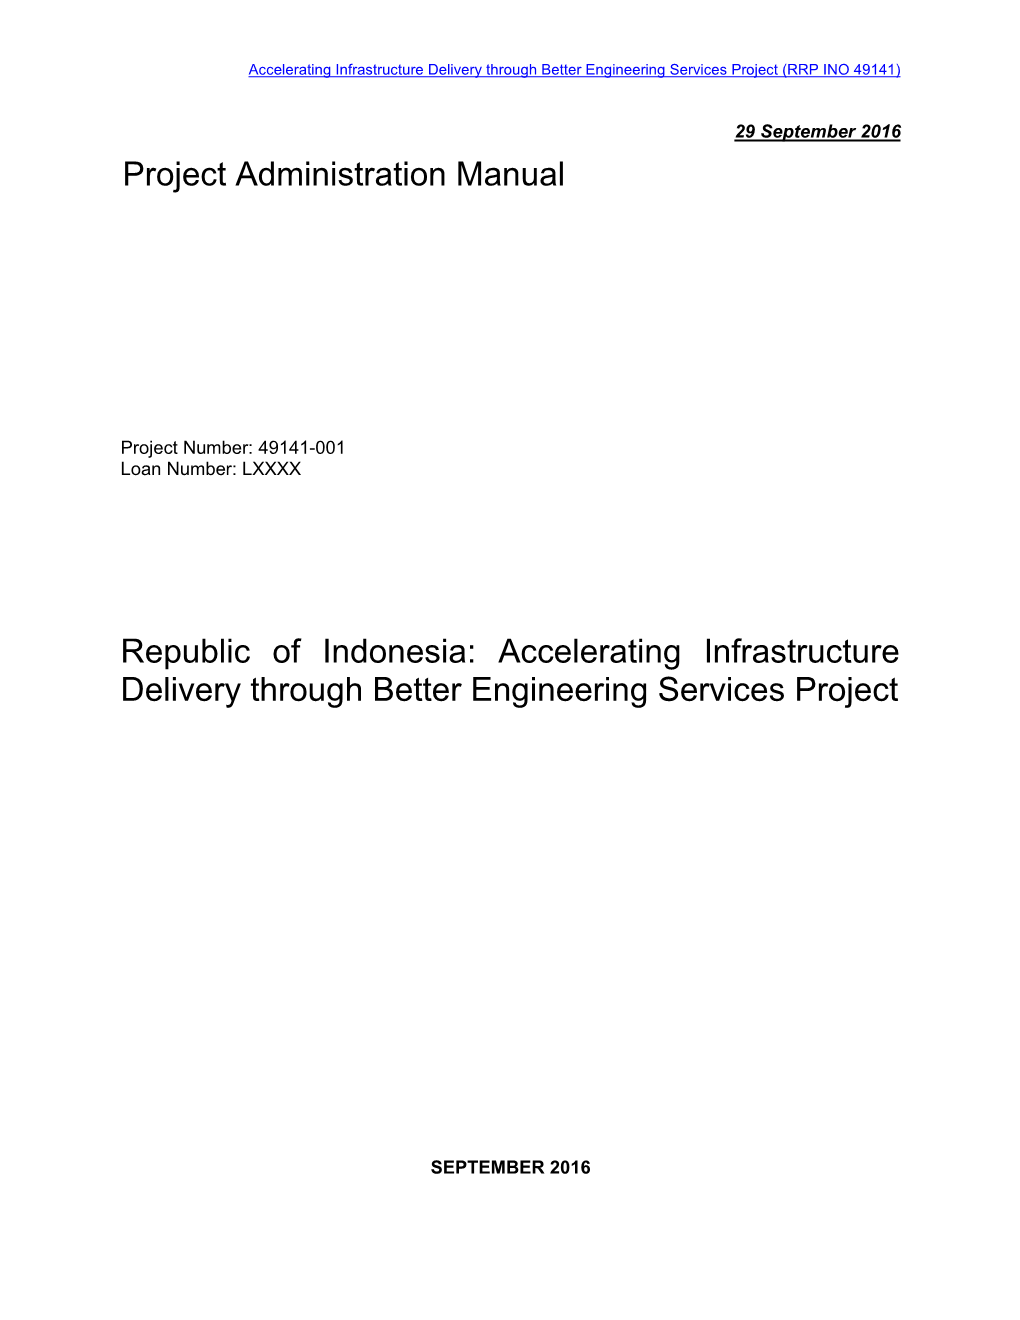 Republic of Indonesia: Accelerating Infrastructure Delivery Through Better Engineering Services Project Project Administration M